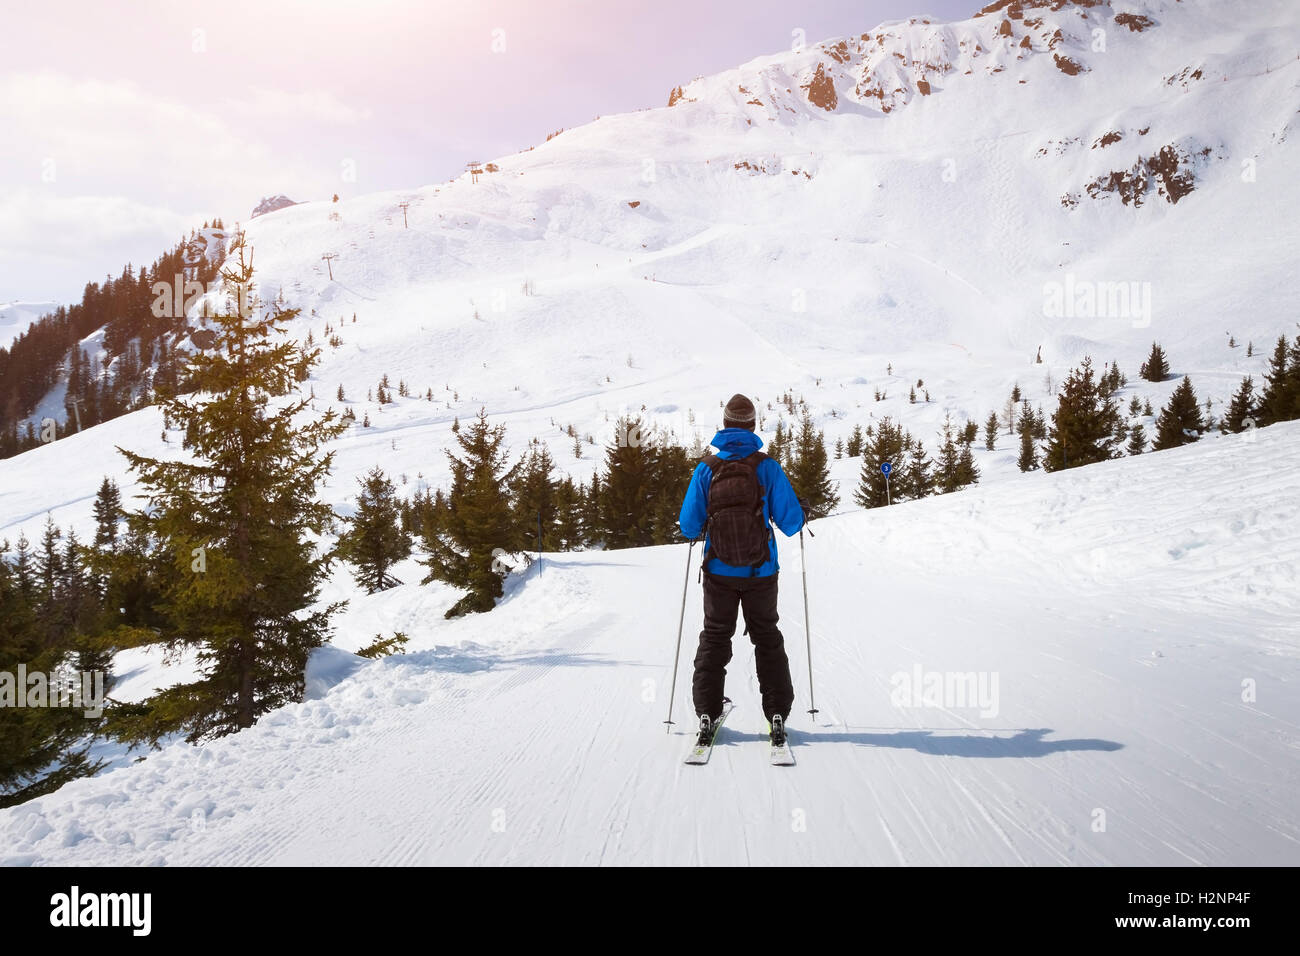 Skier skiing on easy blue trail with beautiful landscape in background Stock Photo